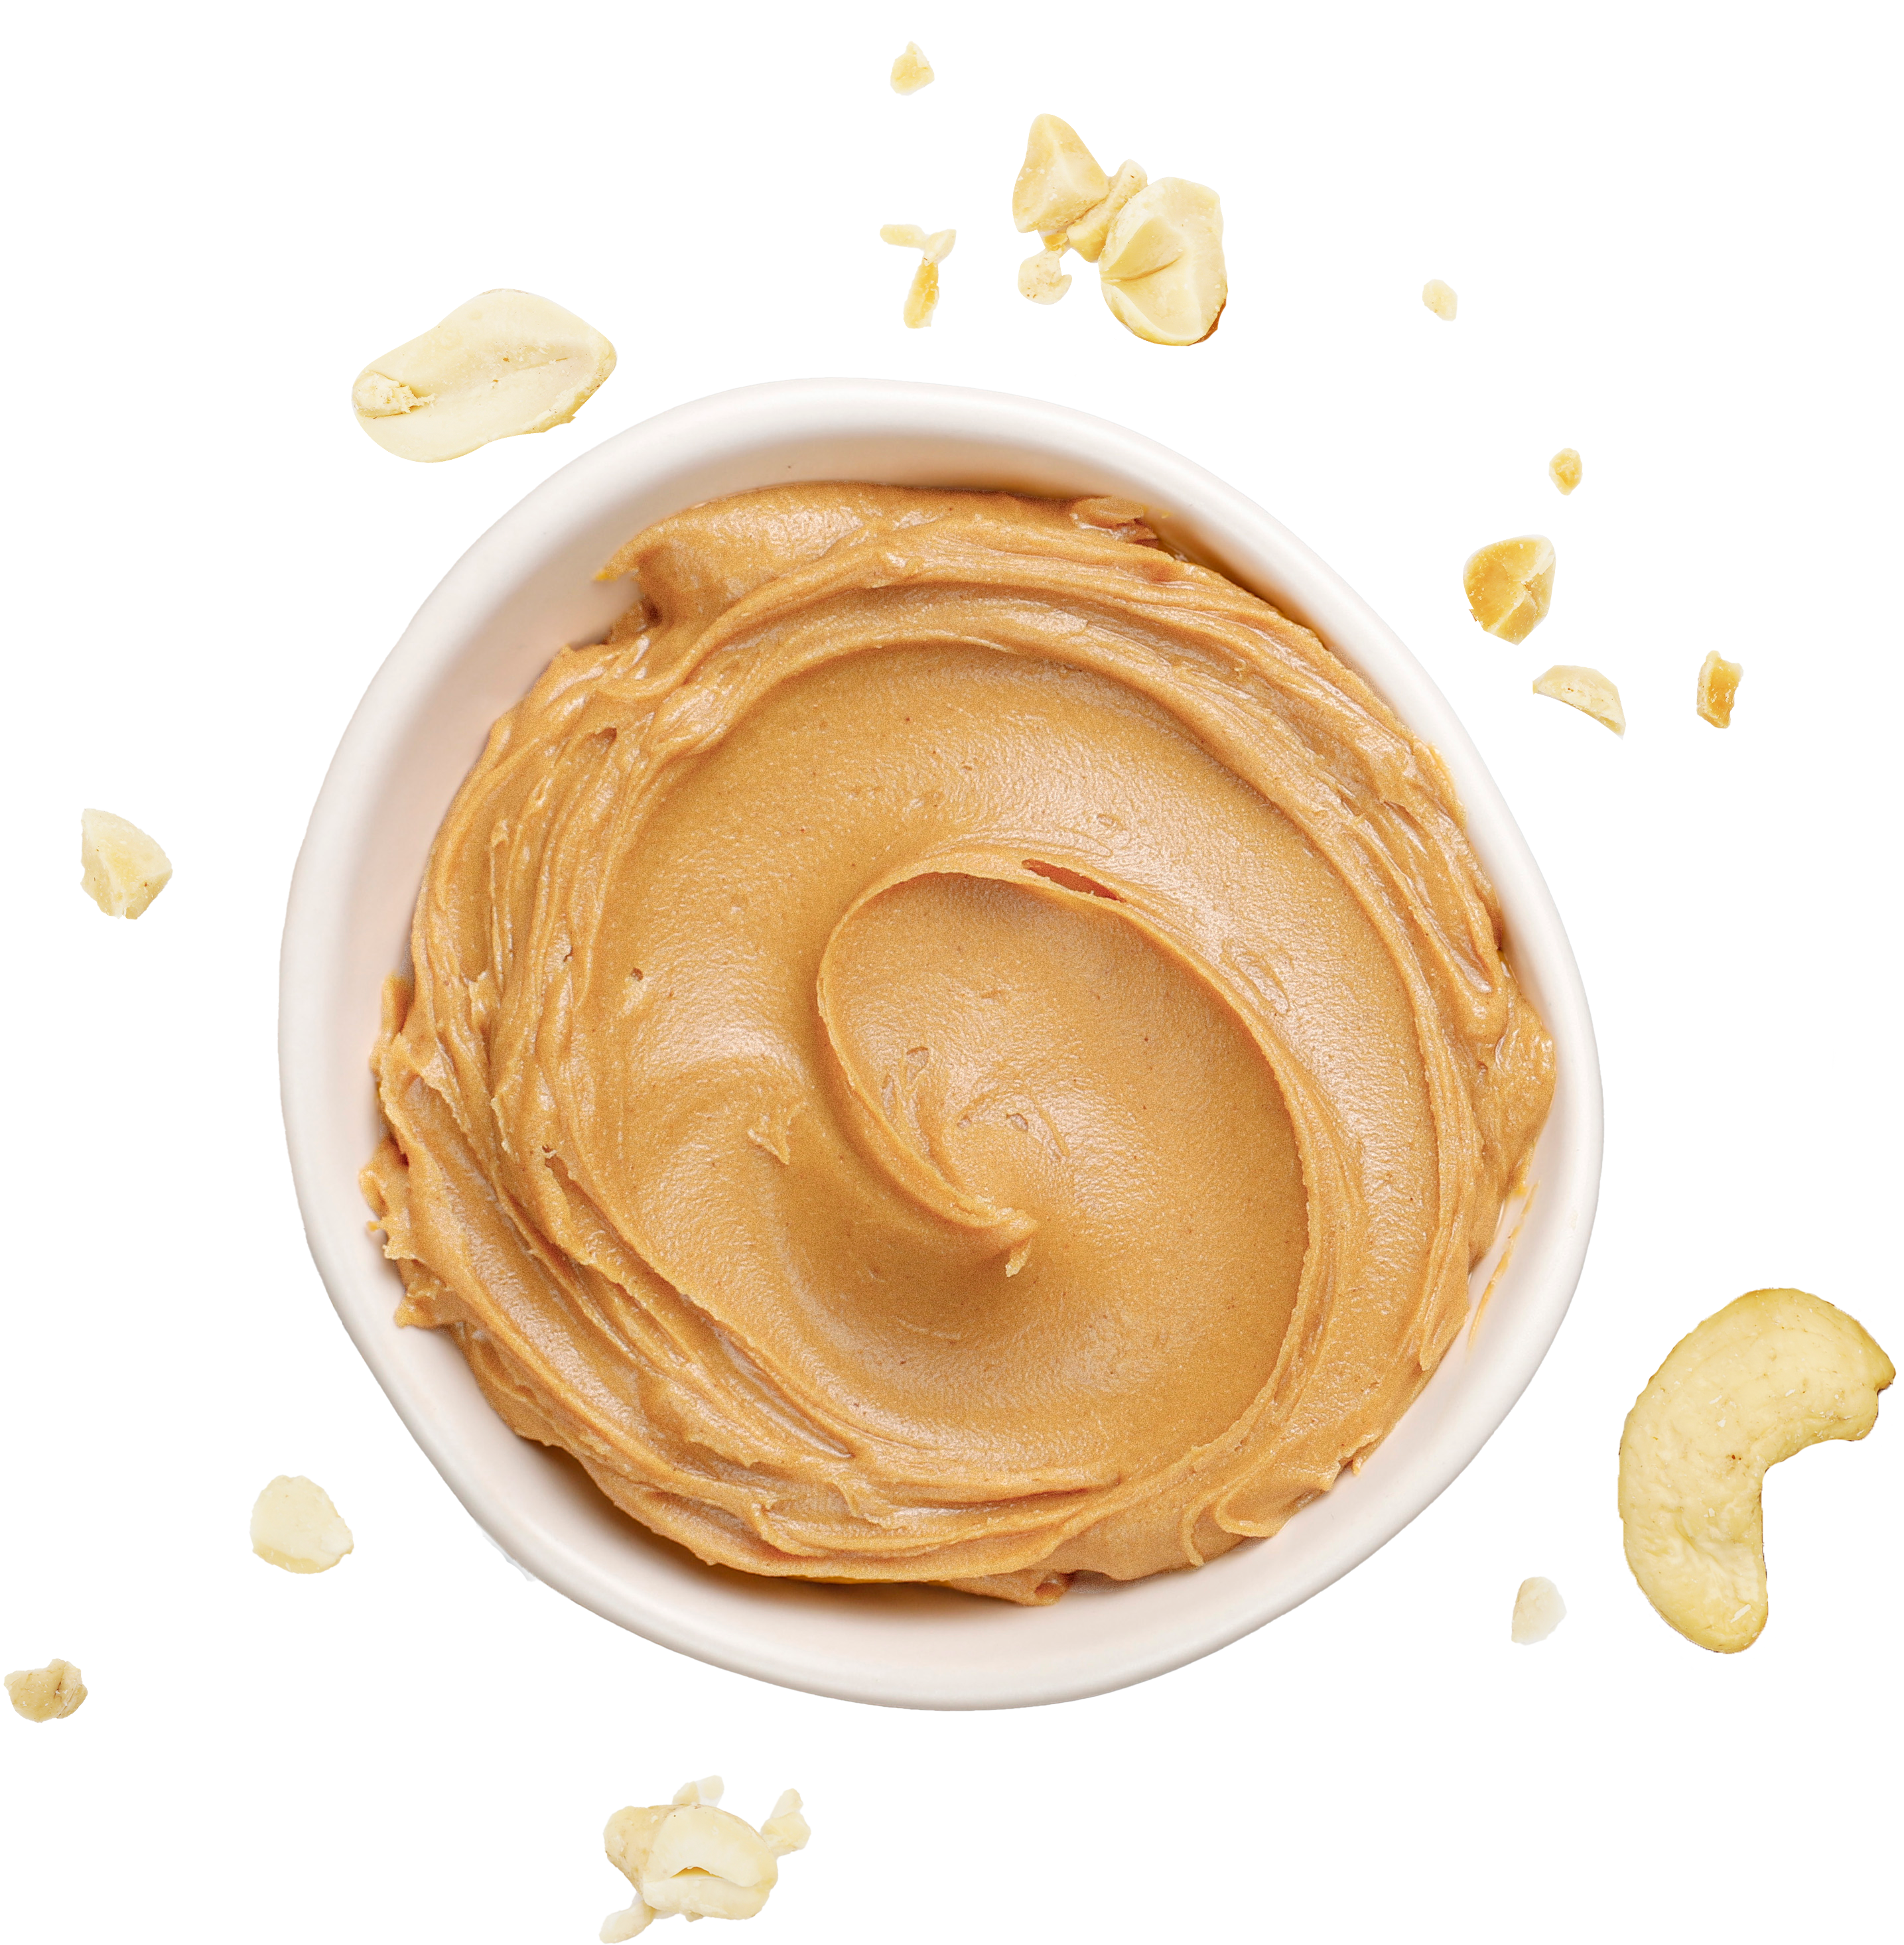 Nut Butter Image